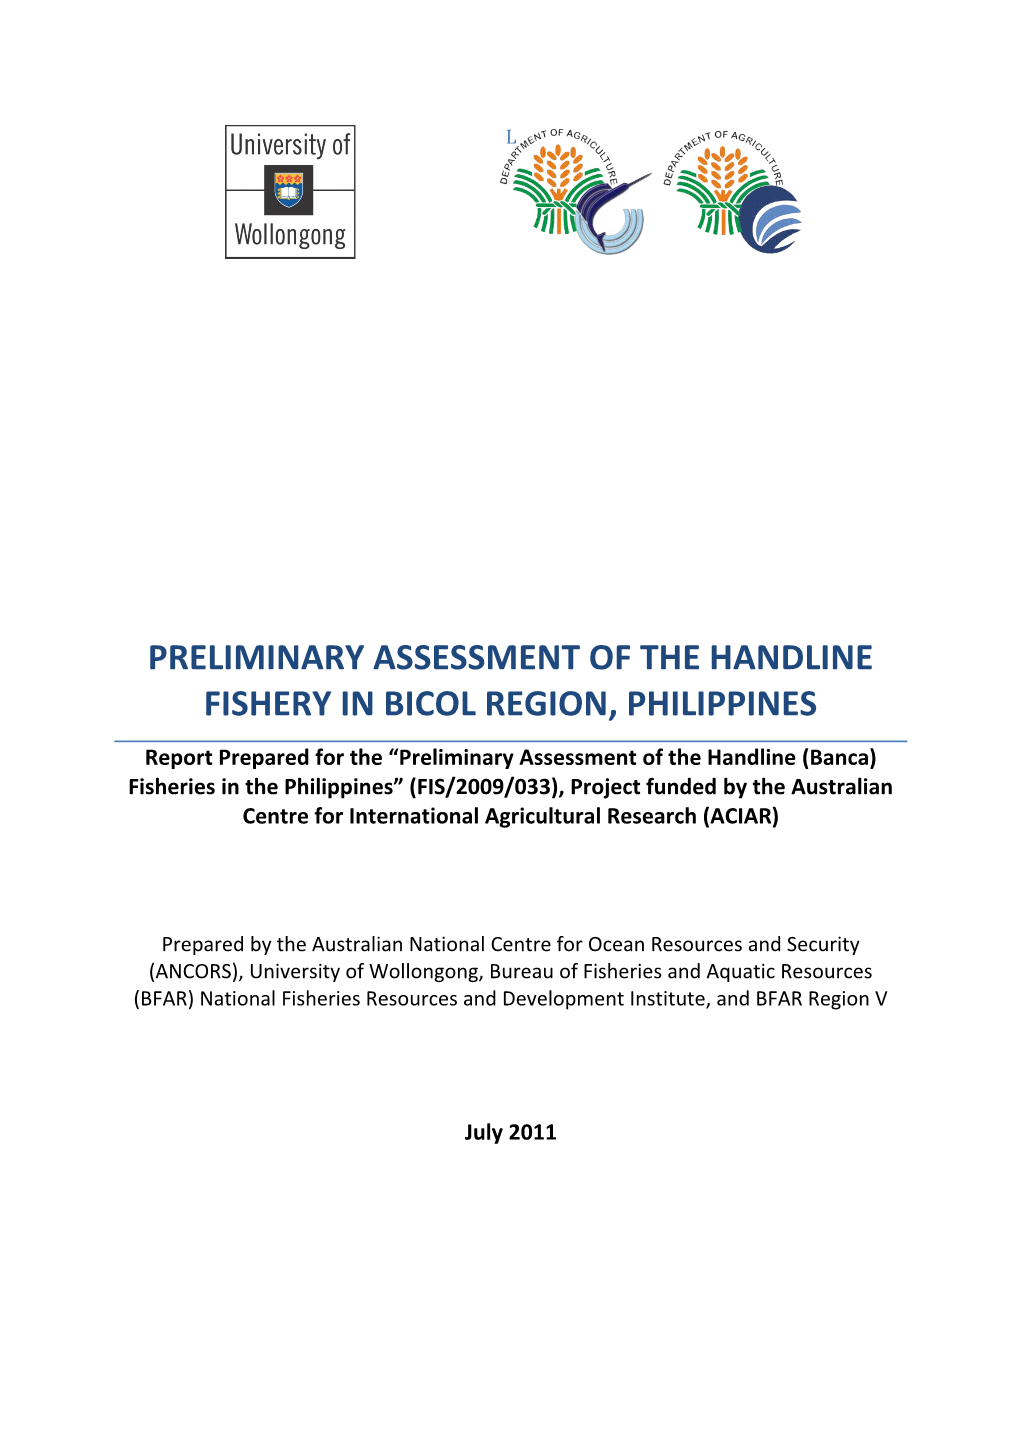 Preliminary Assessment Of The Handline Fishery In Bicol Region, Philippines